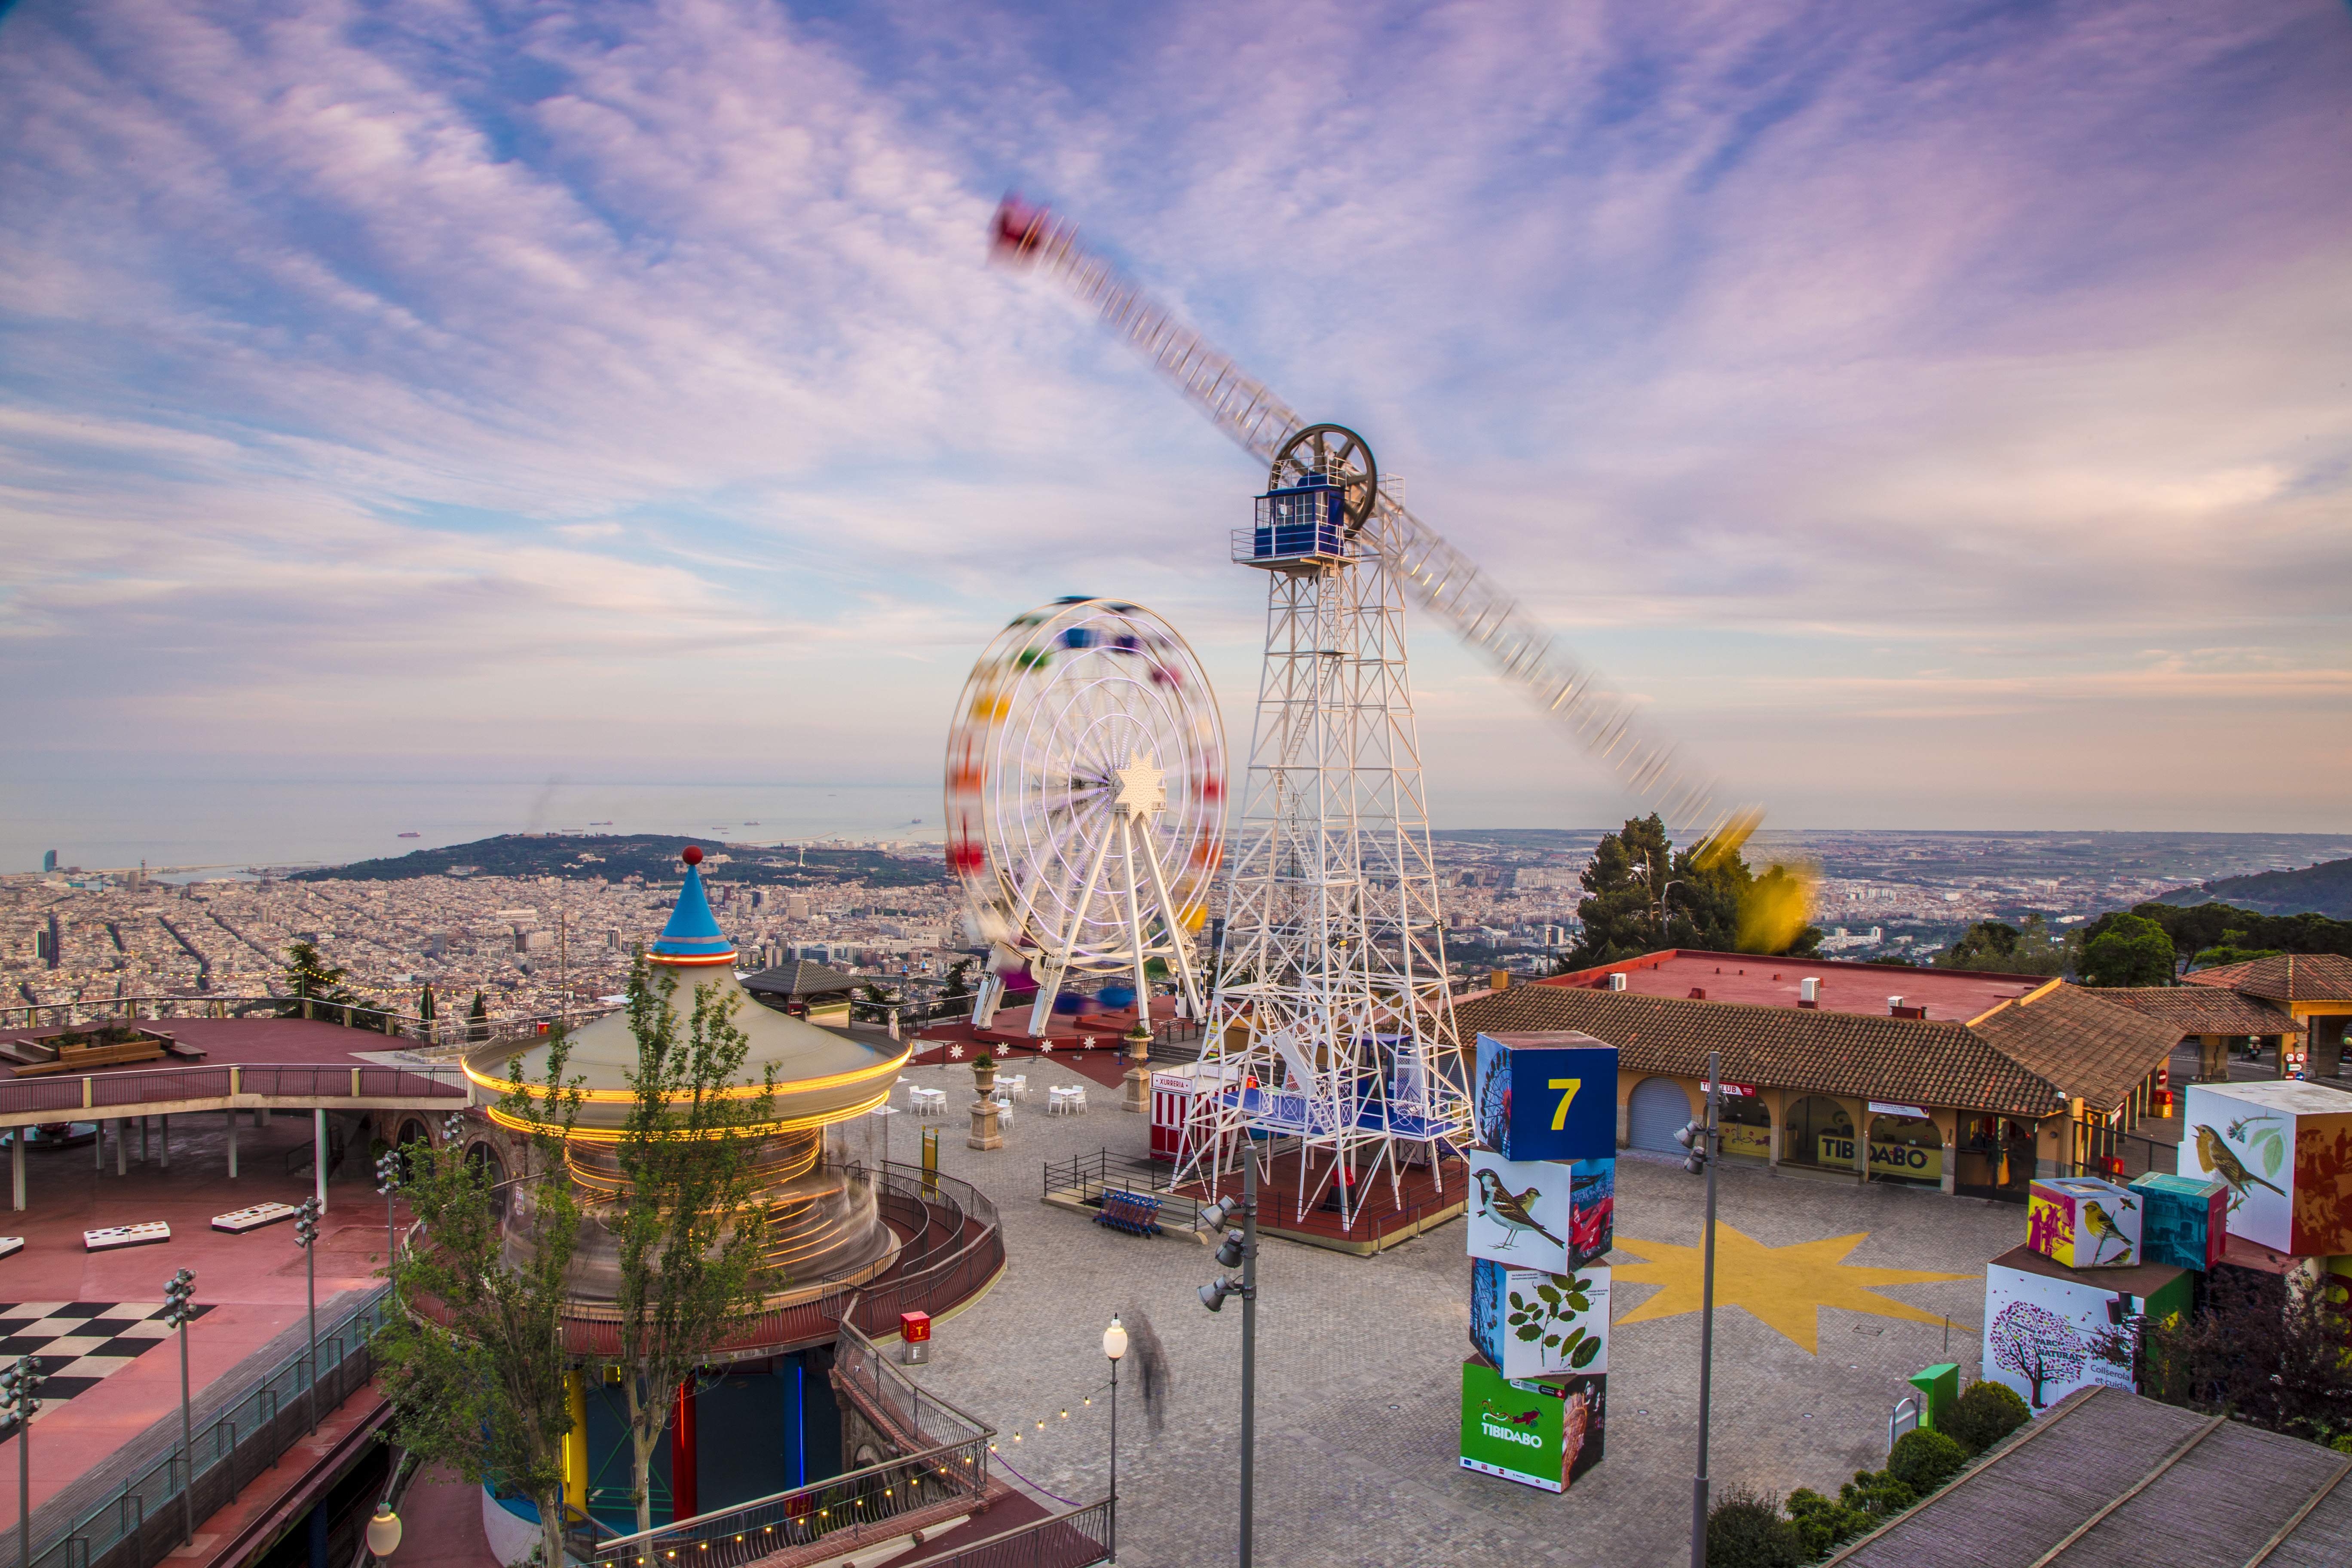 A panoramic view of the Tibidabo amusements park overlooking the city of Barcelona